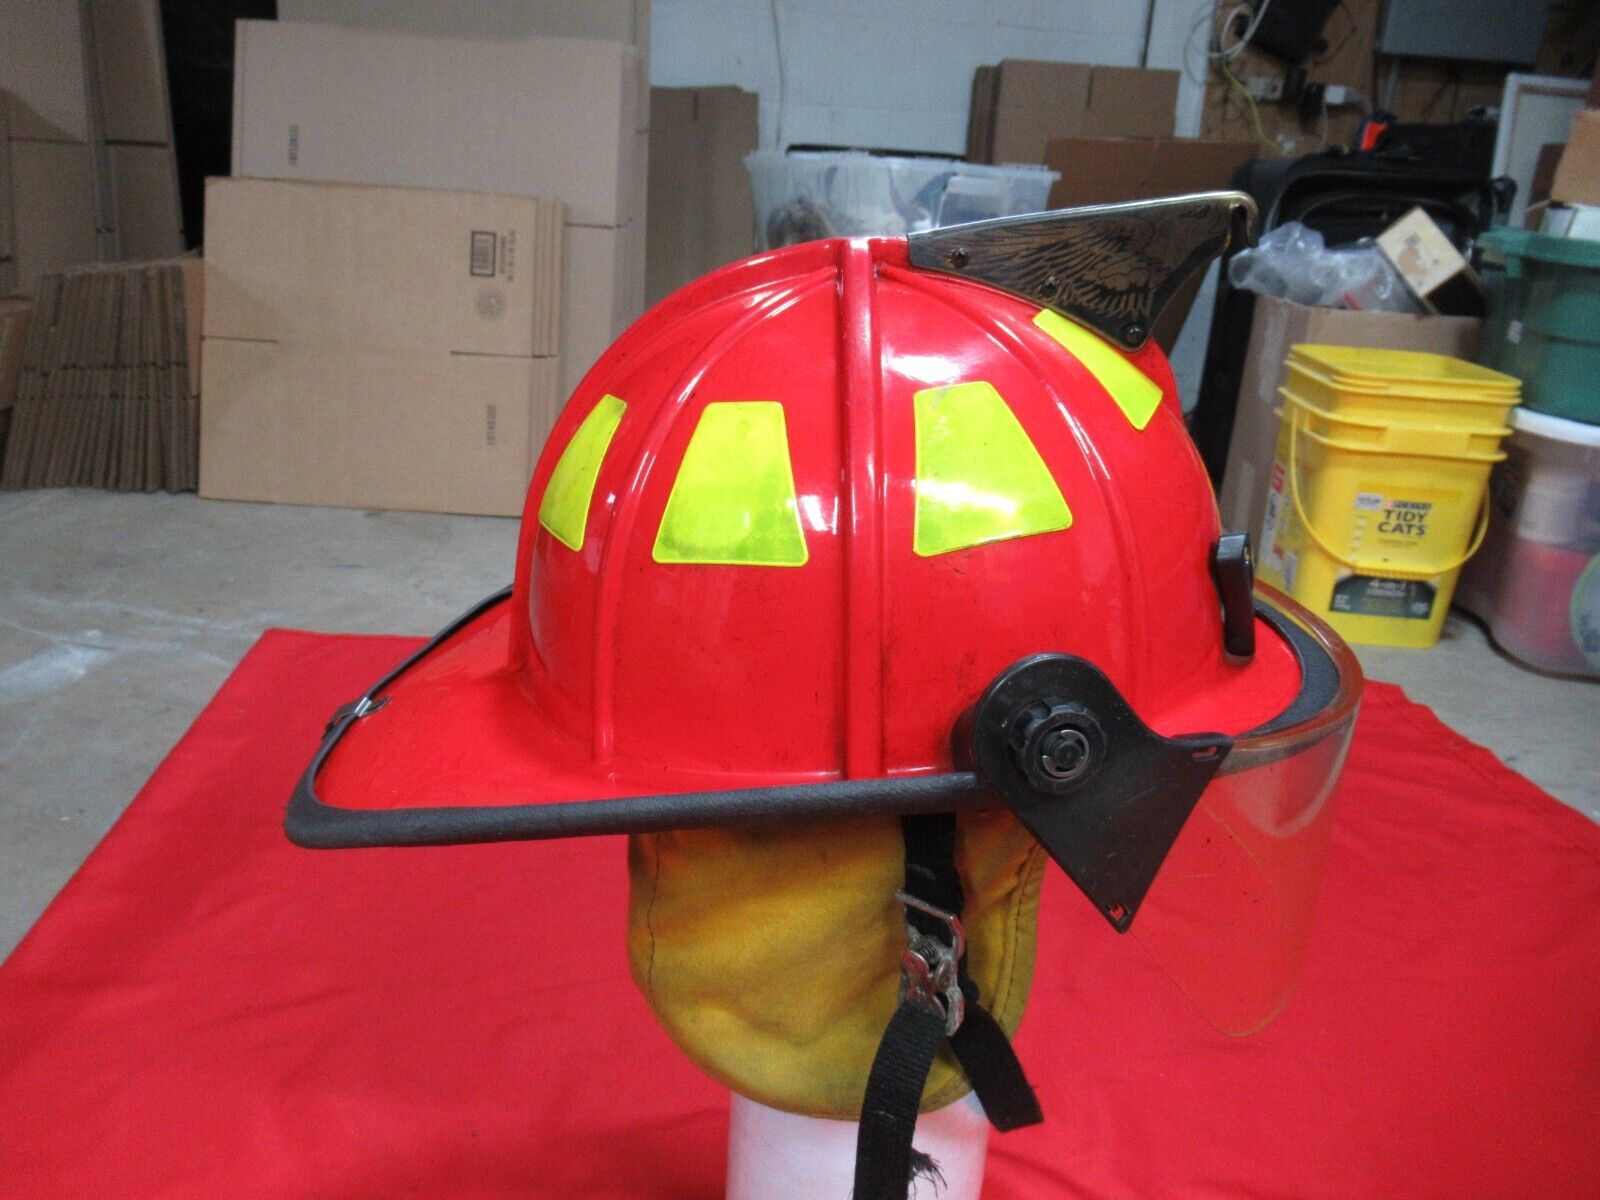 Firefighters helmet Cairns 1010 Fire Helmet With Gold Eagle RESCUE NECK GUARD